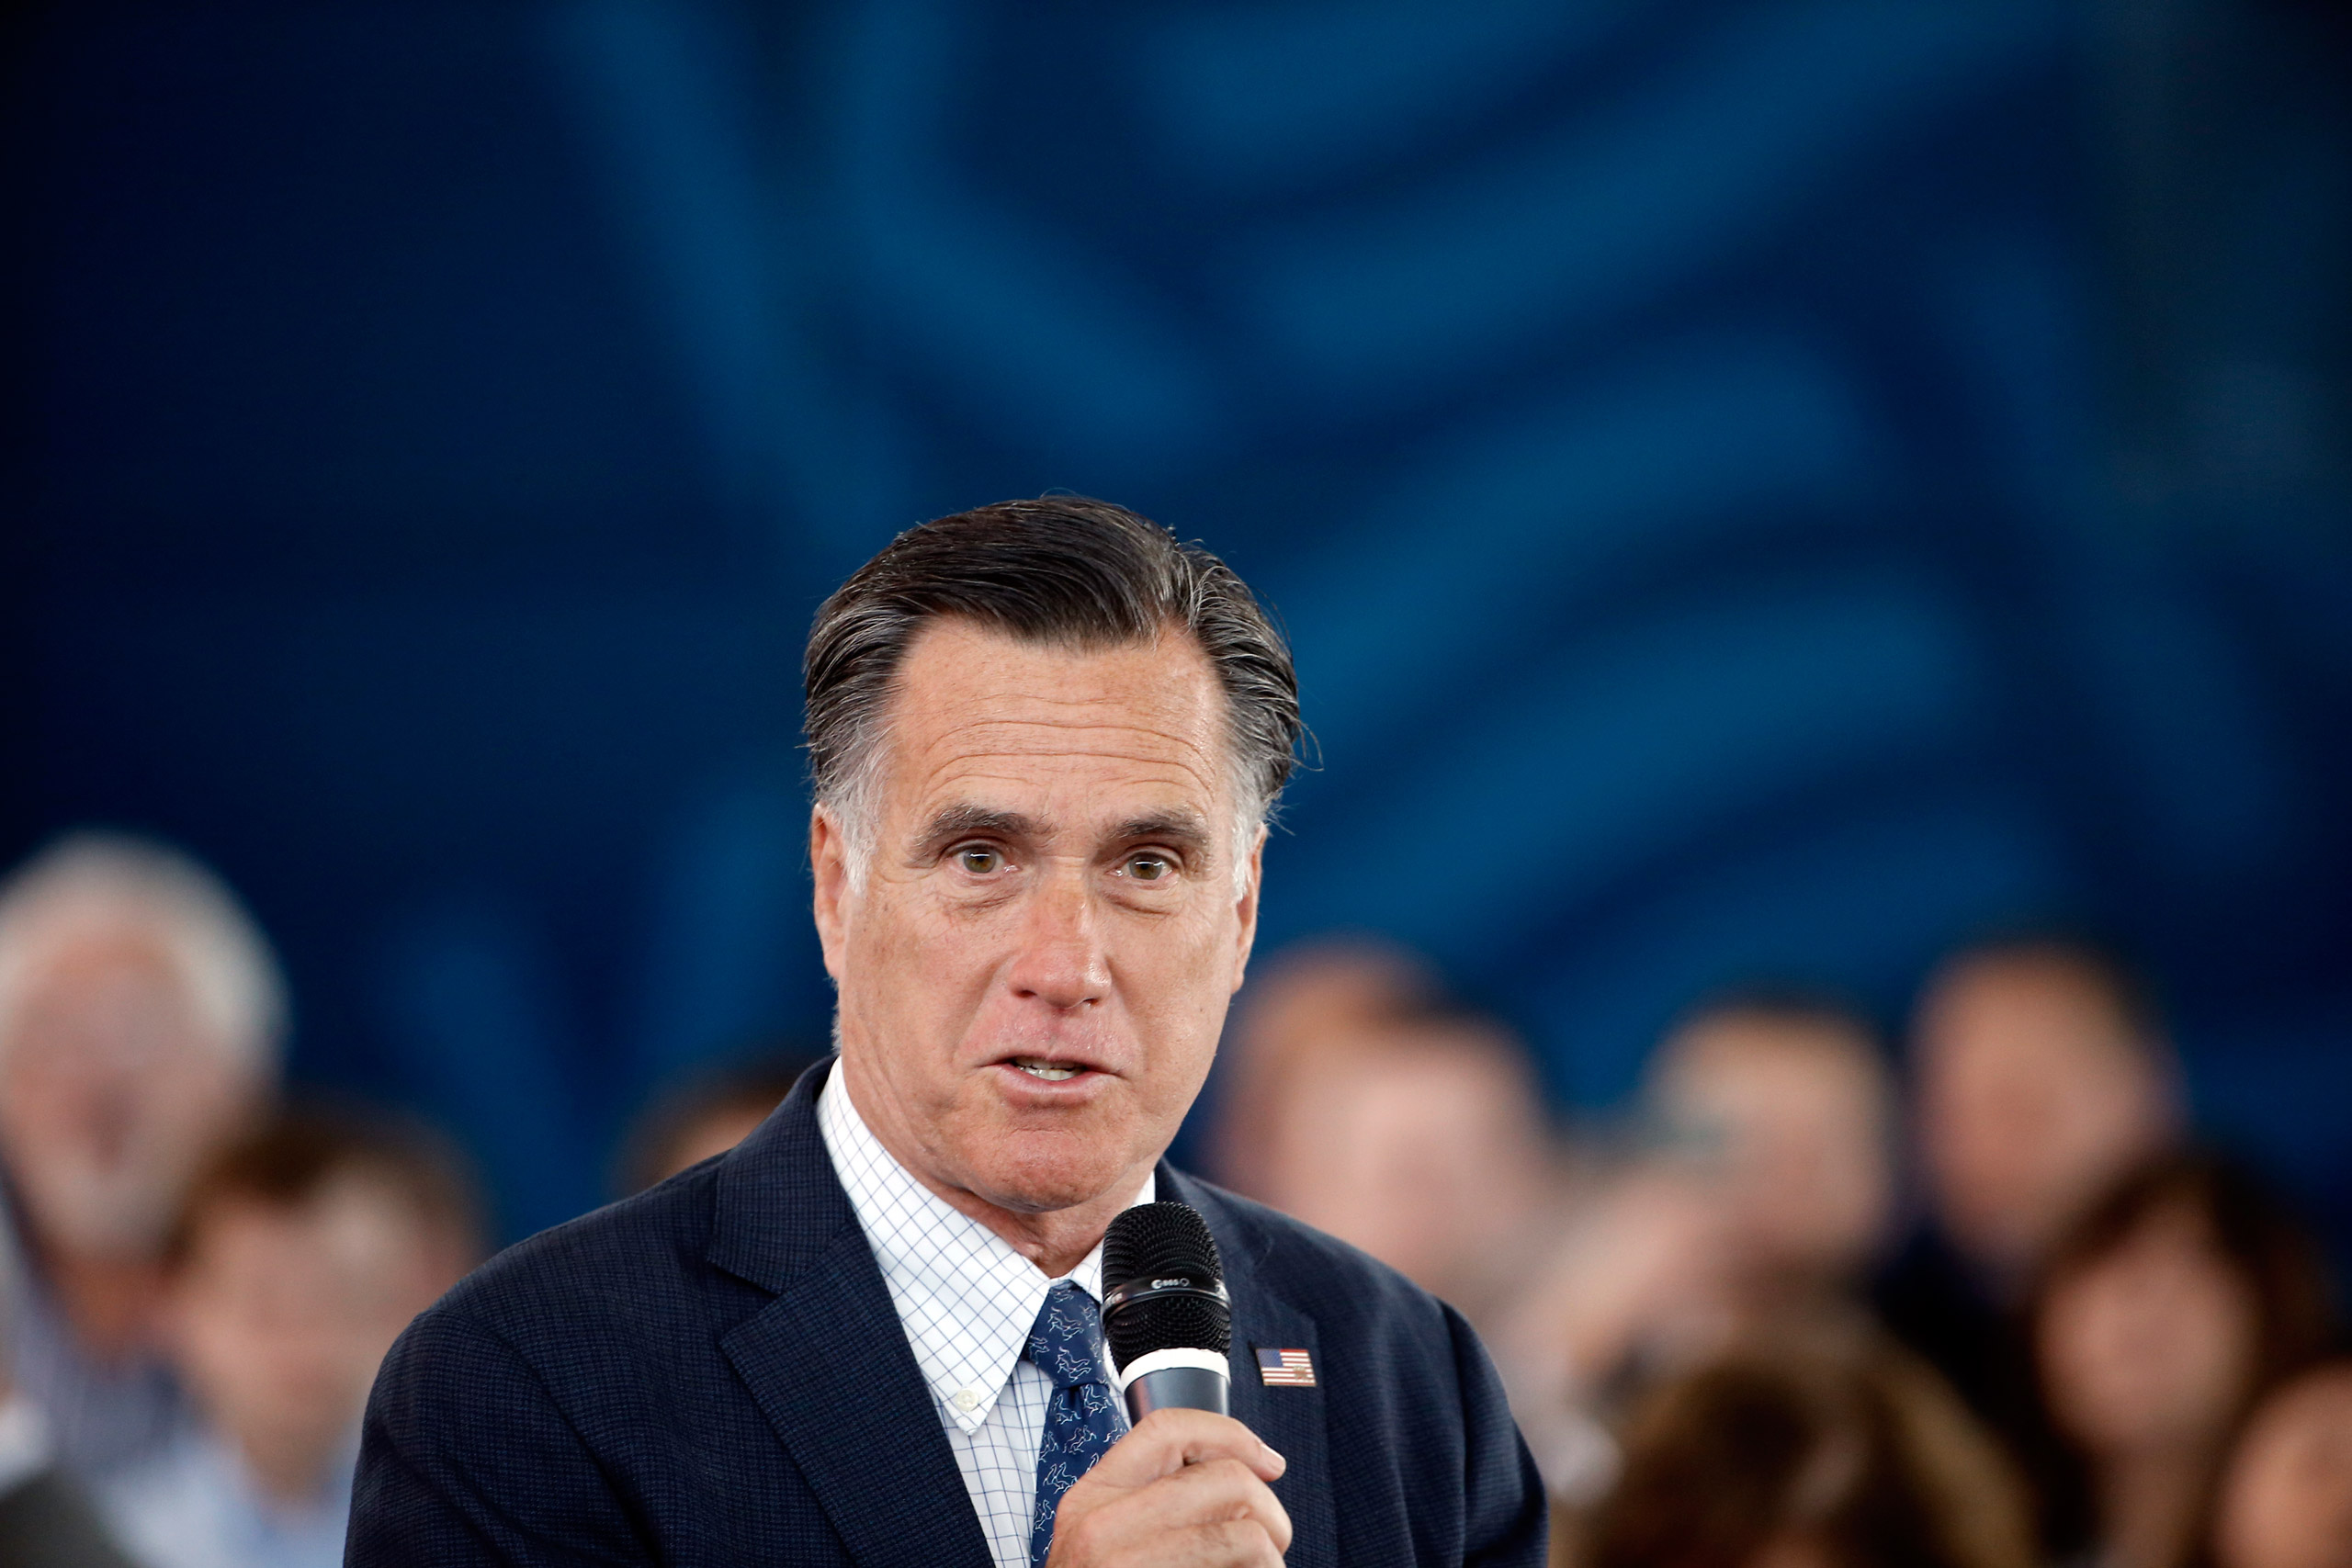 Former Republican presidential candidate Mitt Romney speaks during Republican presidential candidate, Ohio Gov. John Kasich campaign stop on Monday, March 14, 2016, at the MAPS Air Museum in North Canton, Ohio. (AP Photo/Matt Rourke)